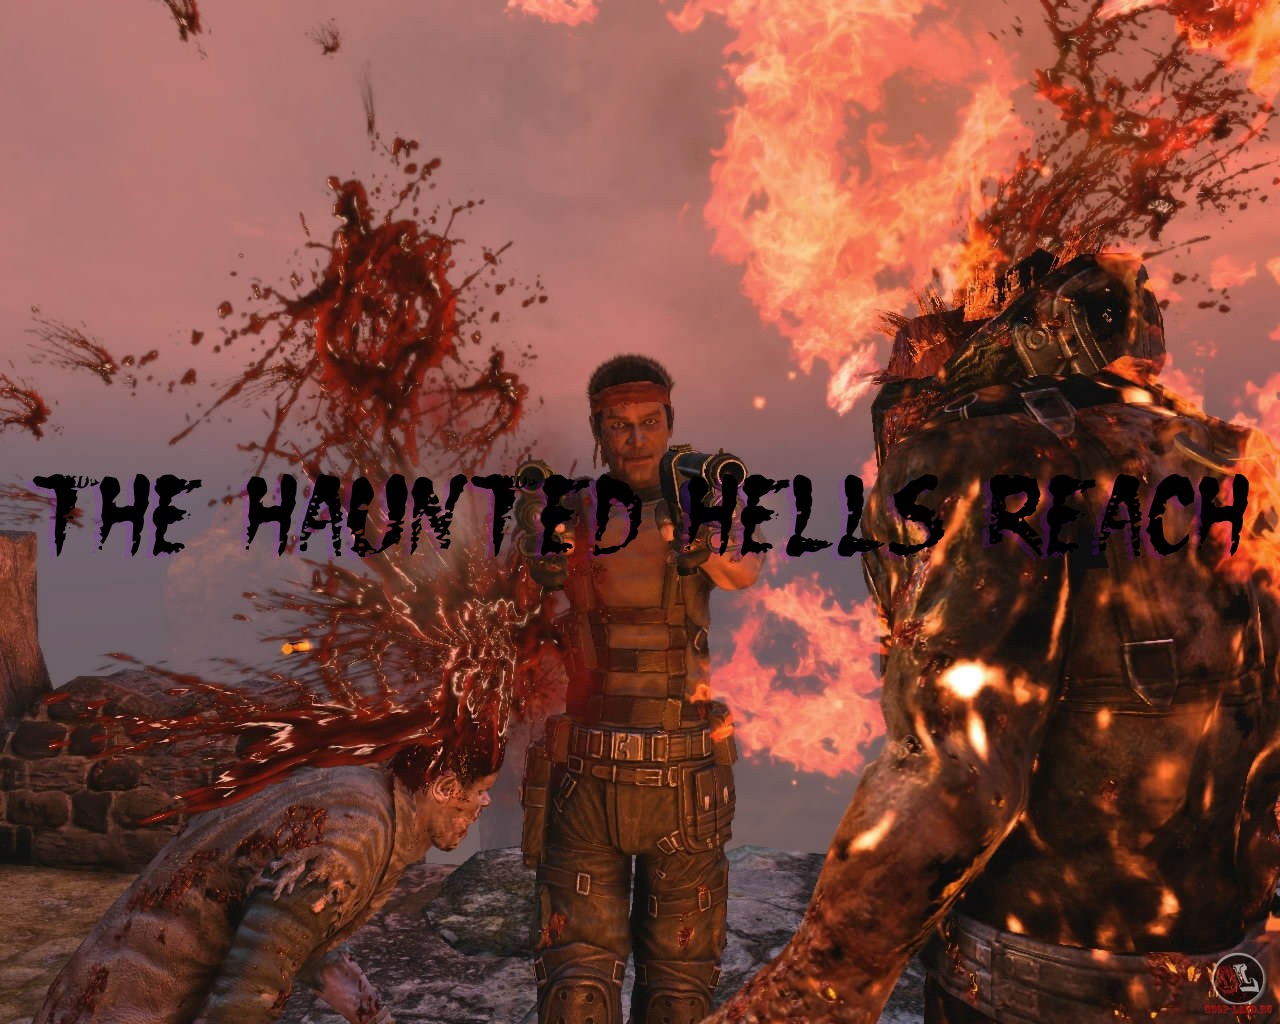 The Haunted Hells Reach